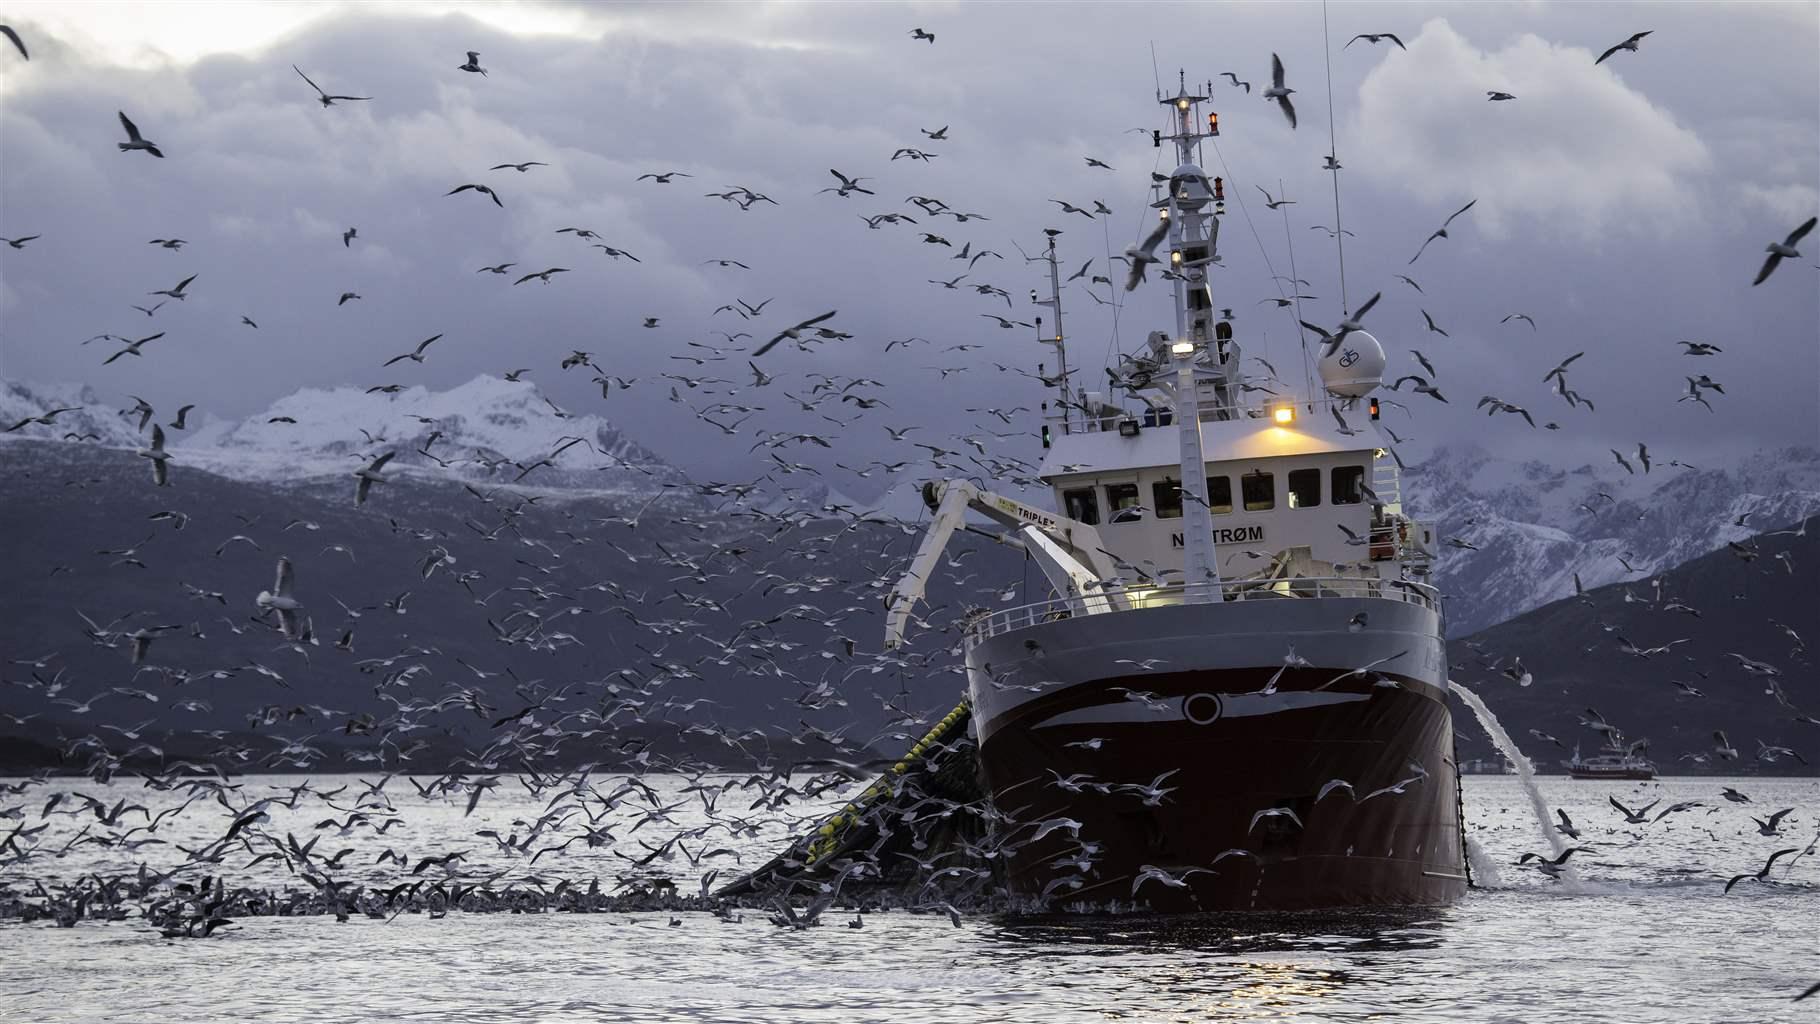 To Improve Fisheries and Ocean Health, Northeast Atlantic Decision